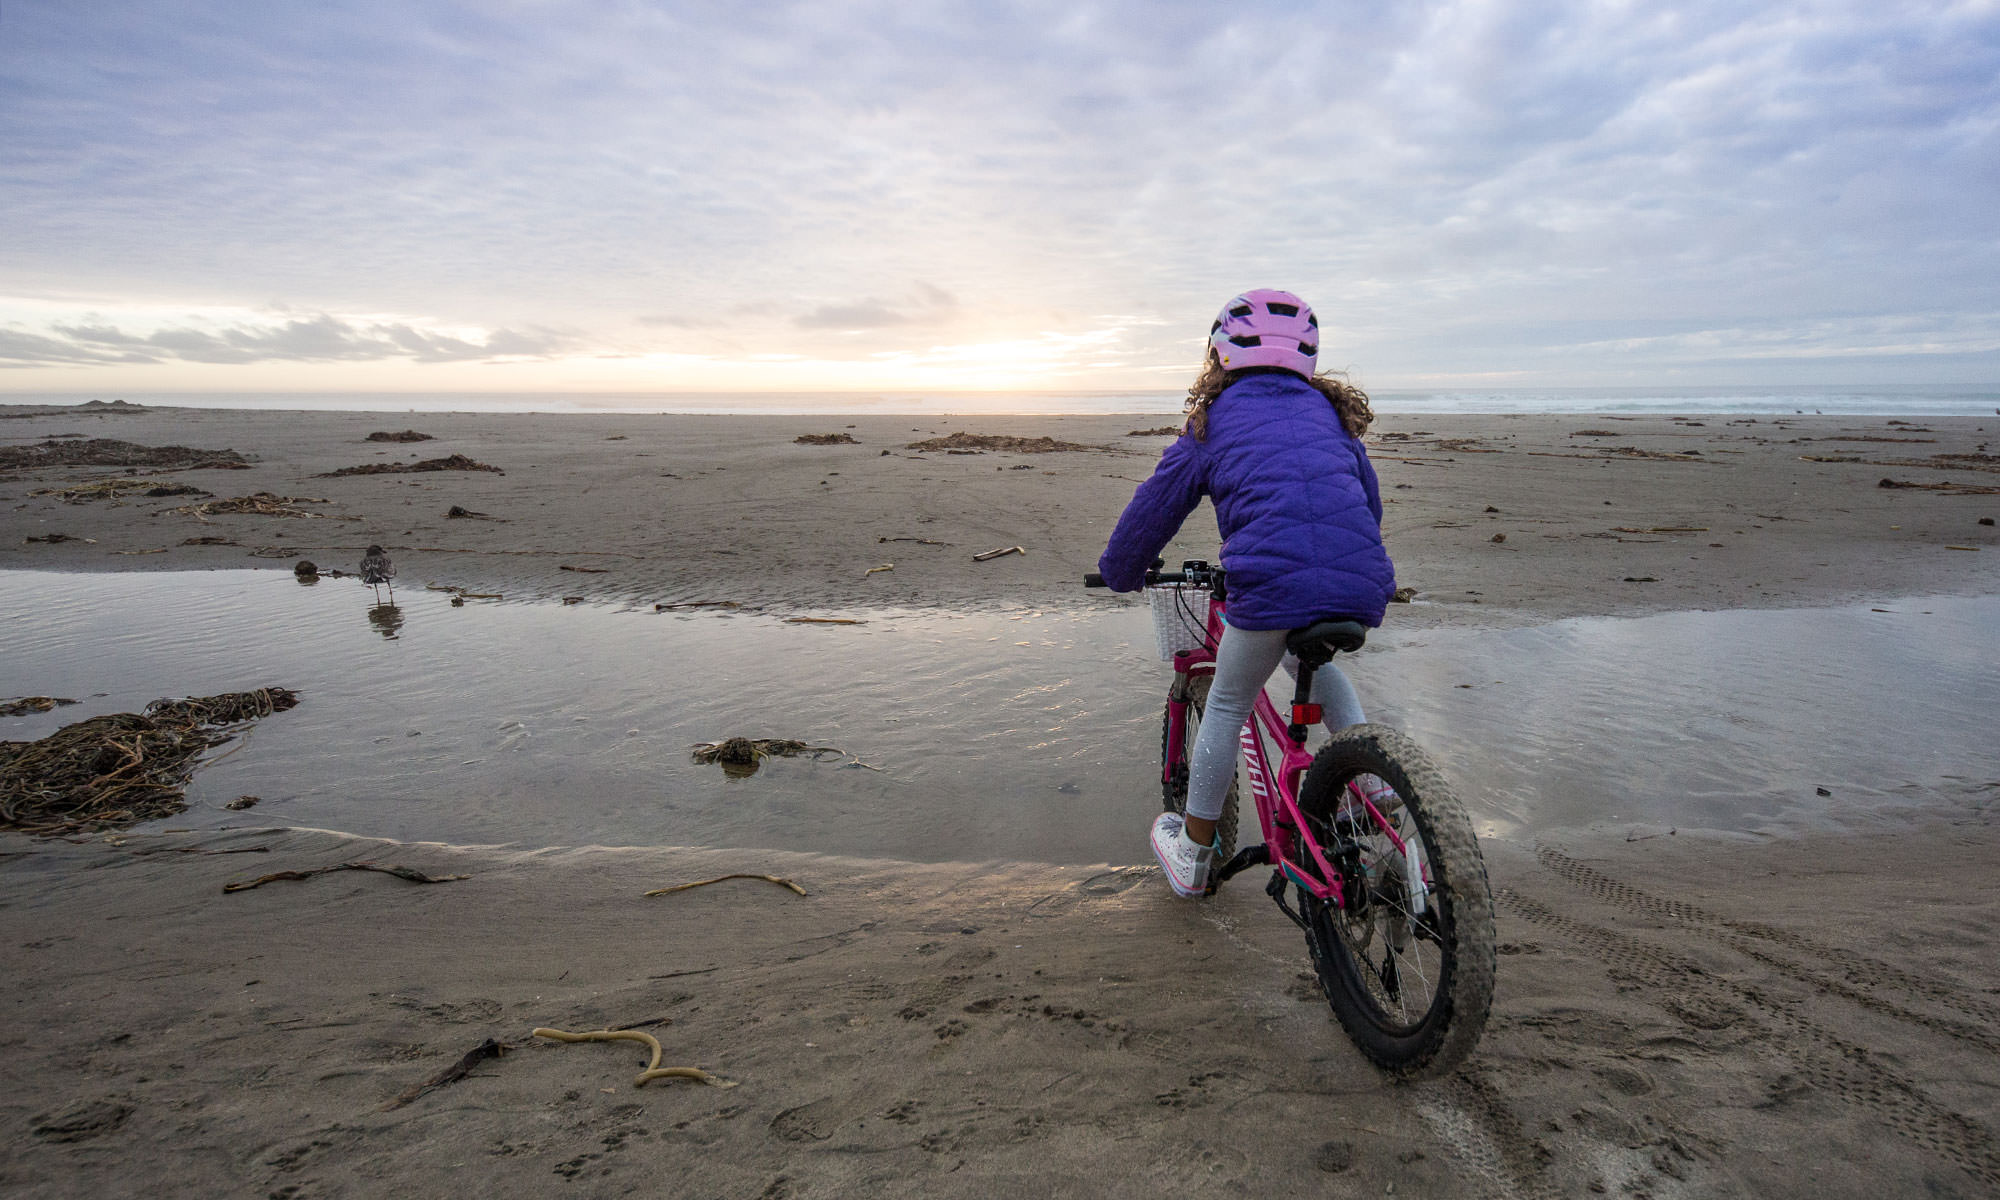 A young girl looks out on the beach from her fat bike.